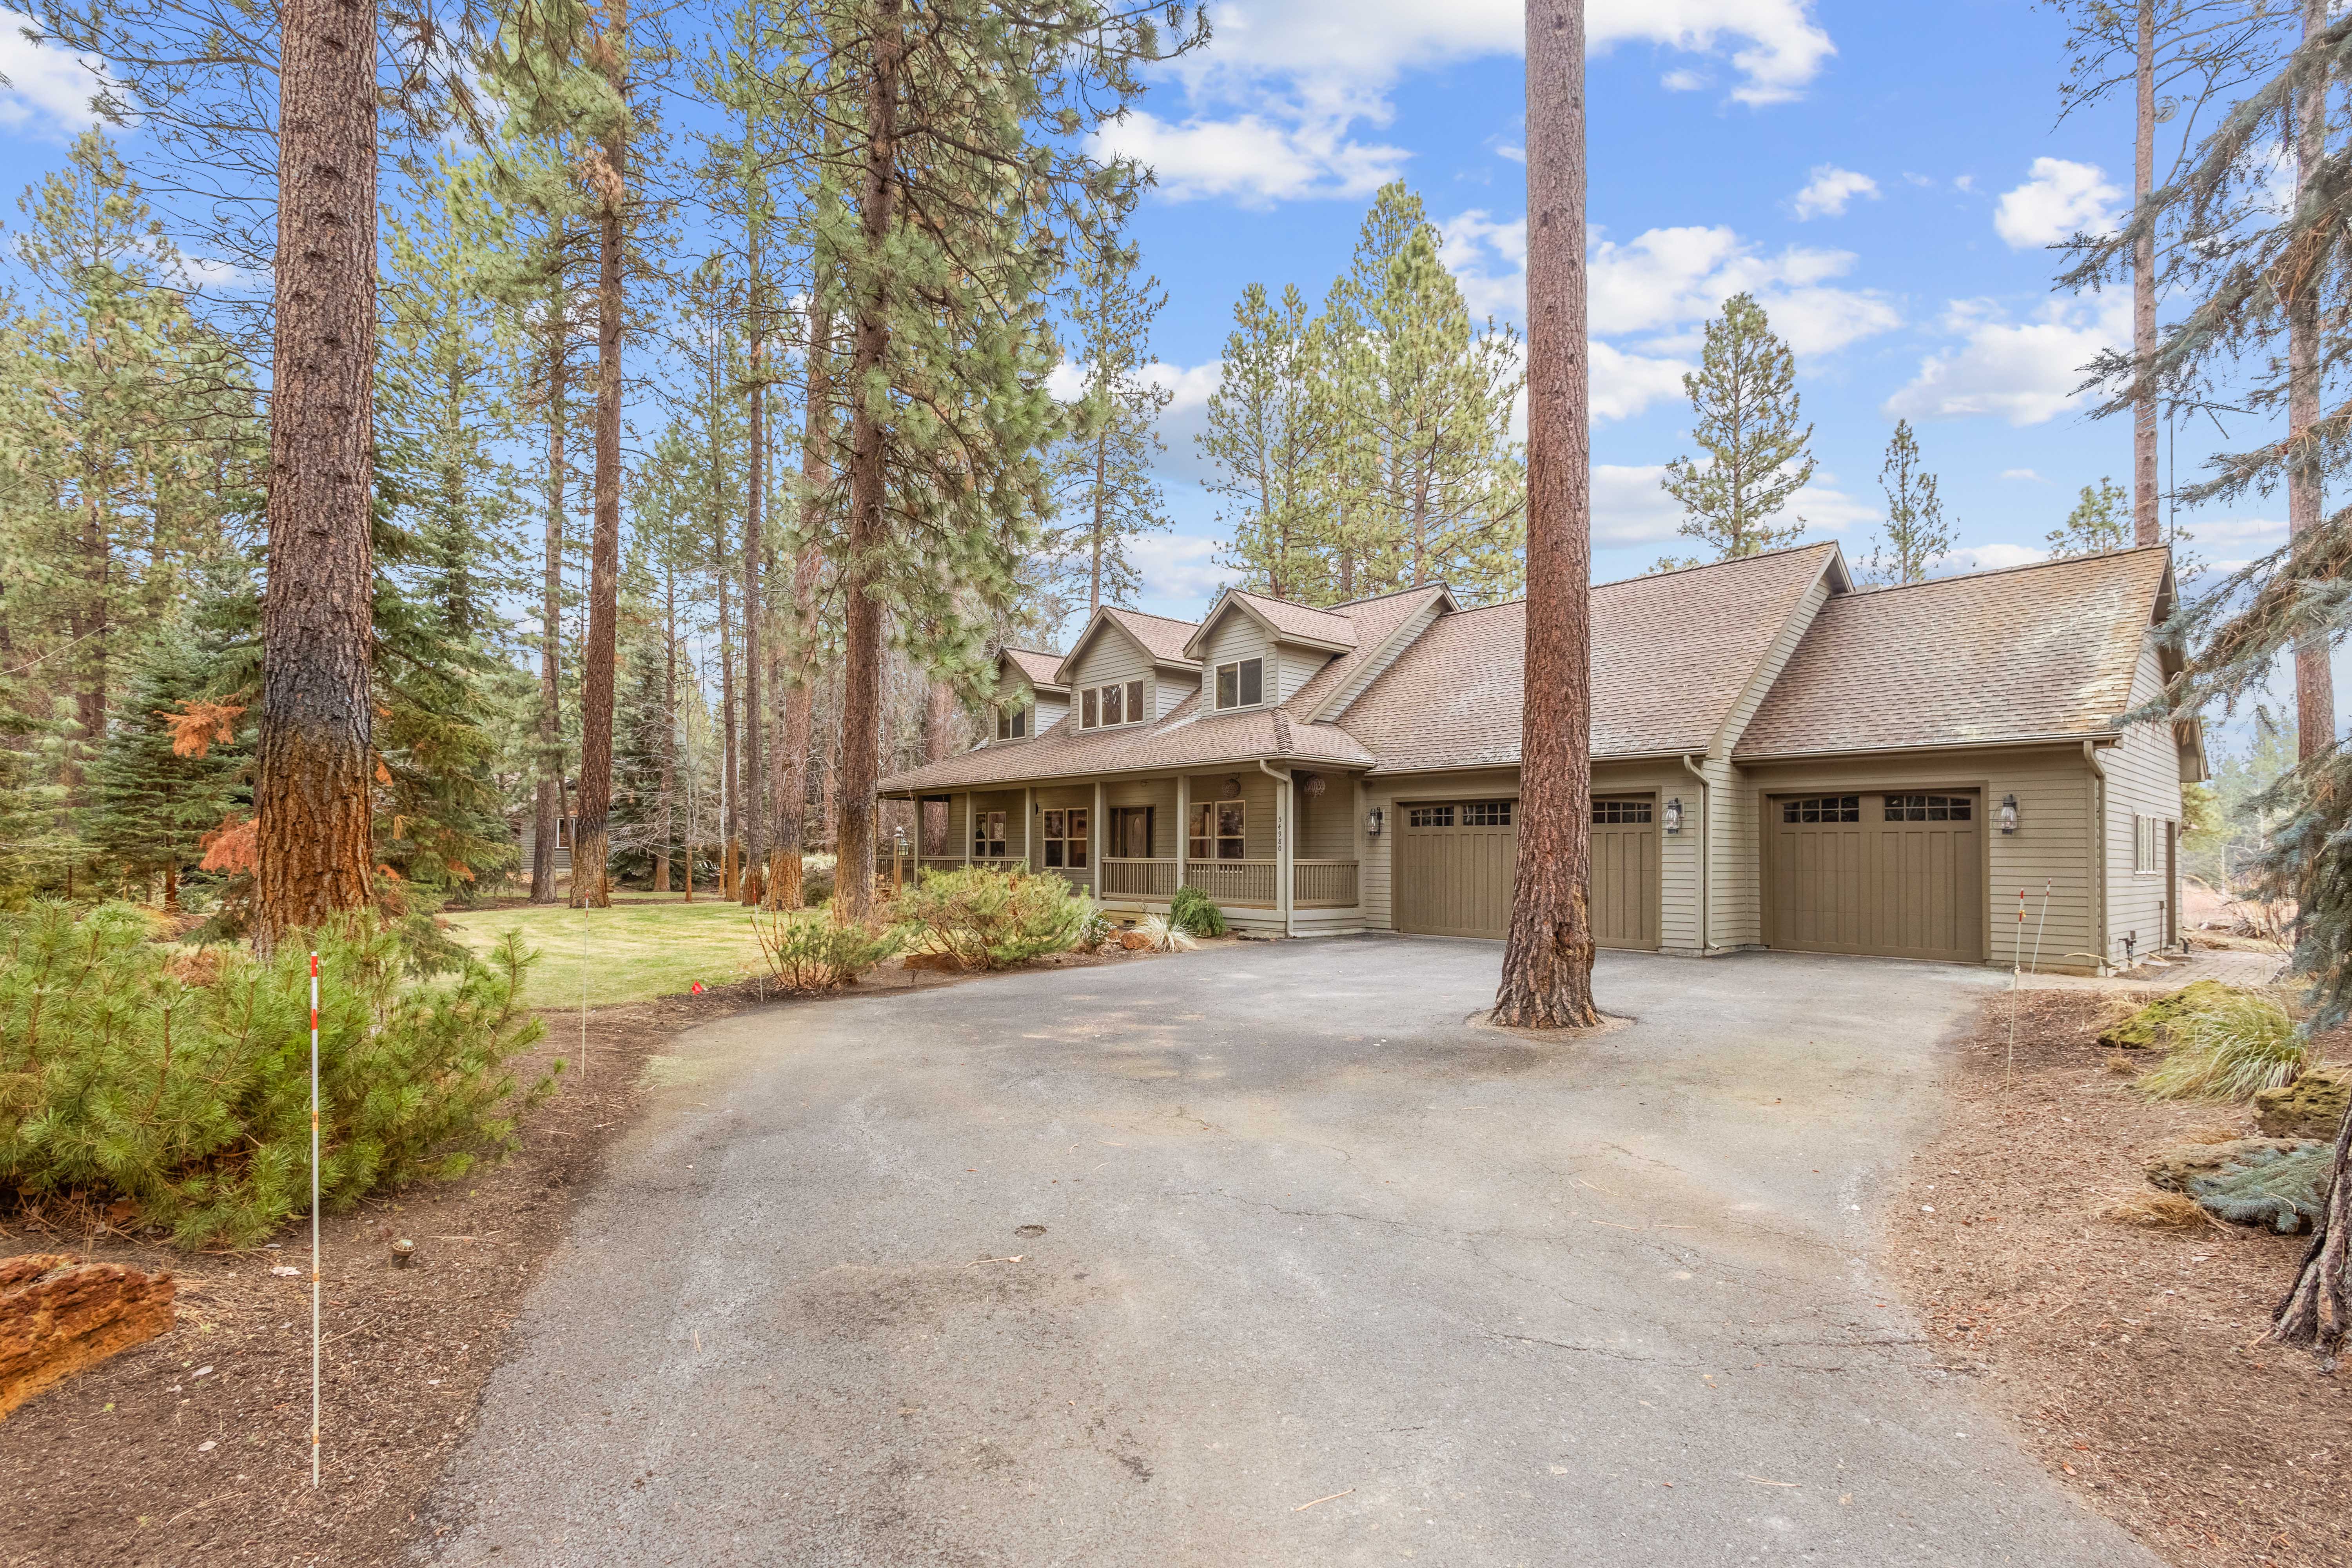 54980 Peyton Place, Bend, Oregon, 97707, United States, 4 Bedrooms Bedrooms, ,4 BathroomsBathrooms,Residential,For Sale,54980 Peyton Place,1431907